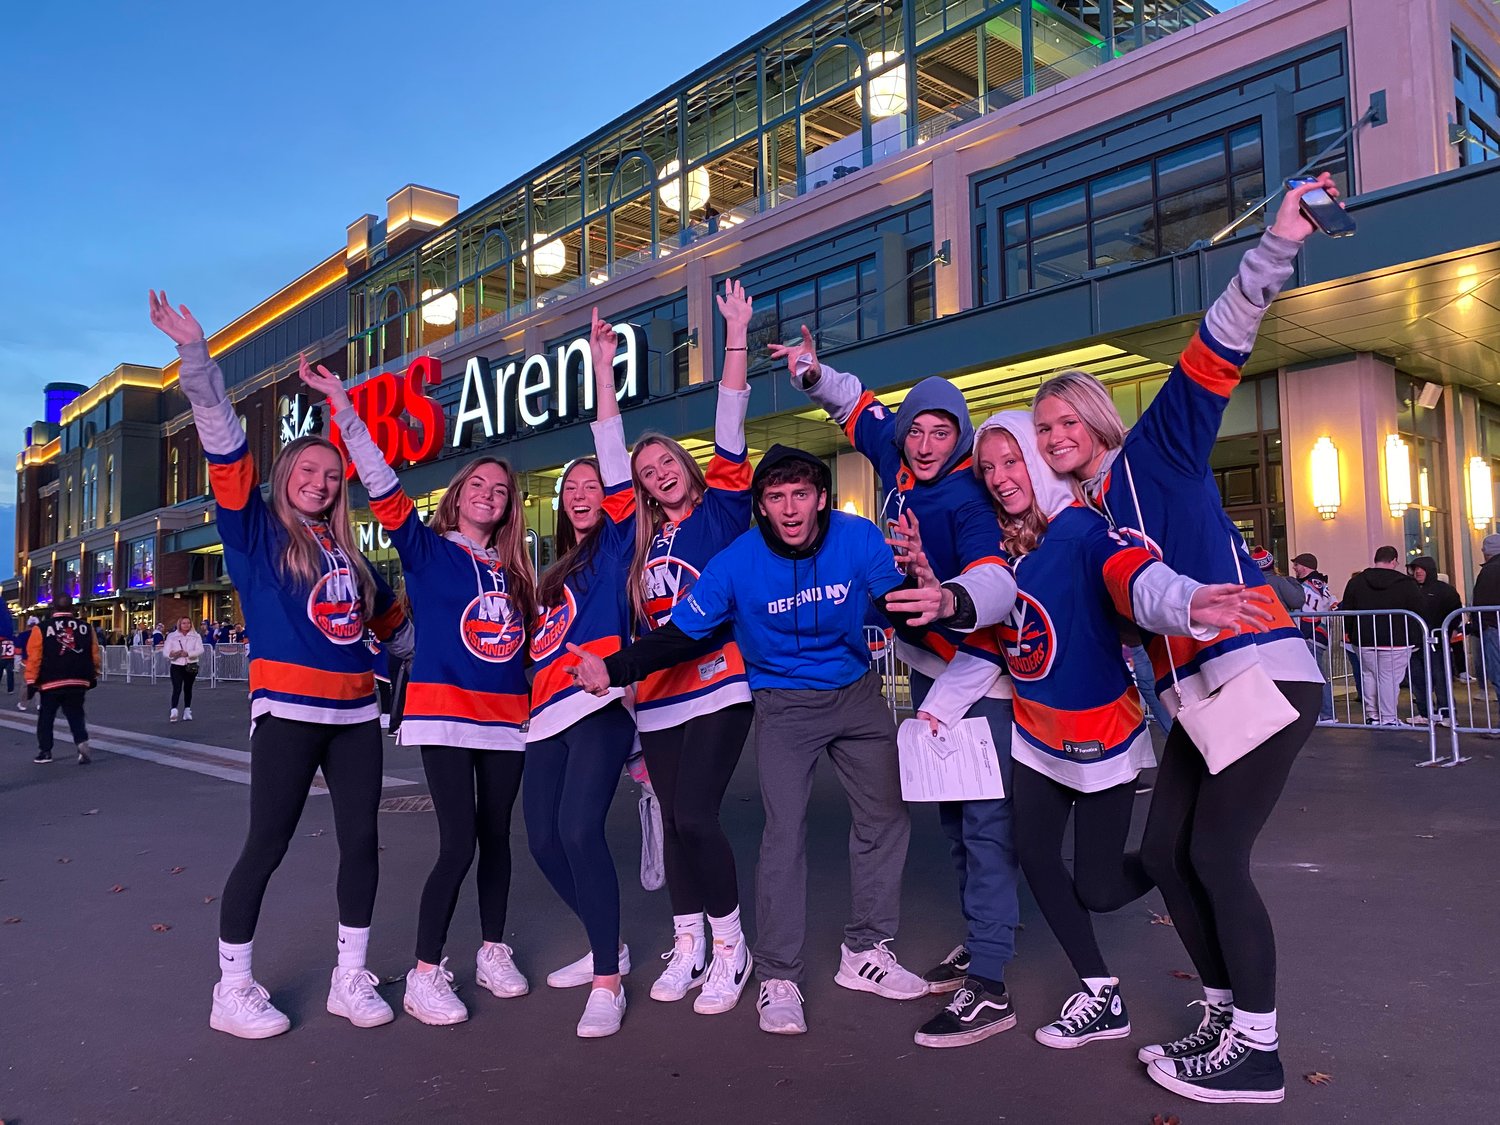 Isles fans got pumped up before entering UBS Arena for the first time.